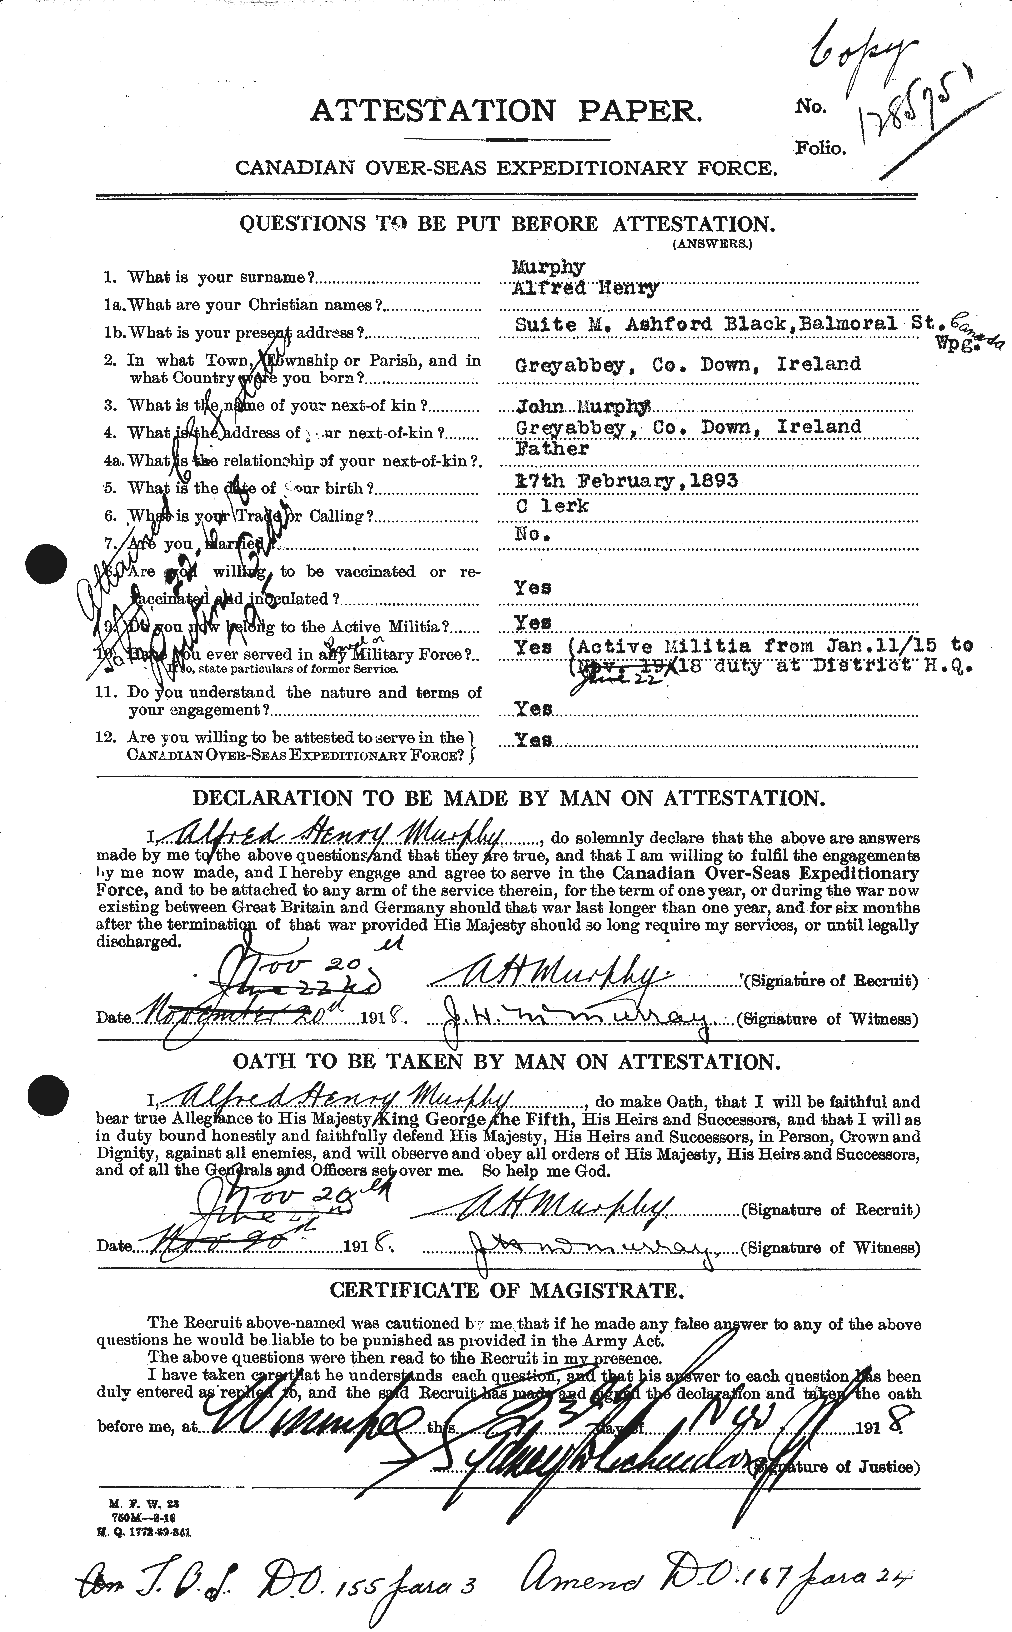 Personnel Records of the First World War - CEF 512649a